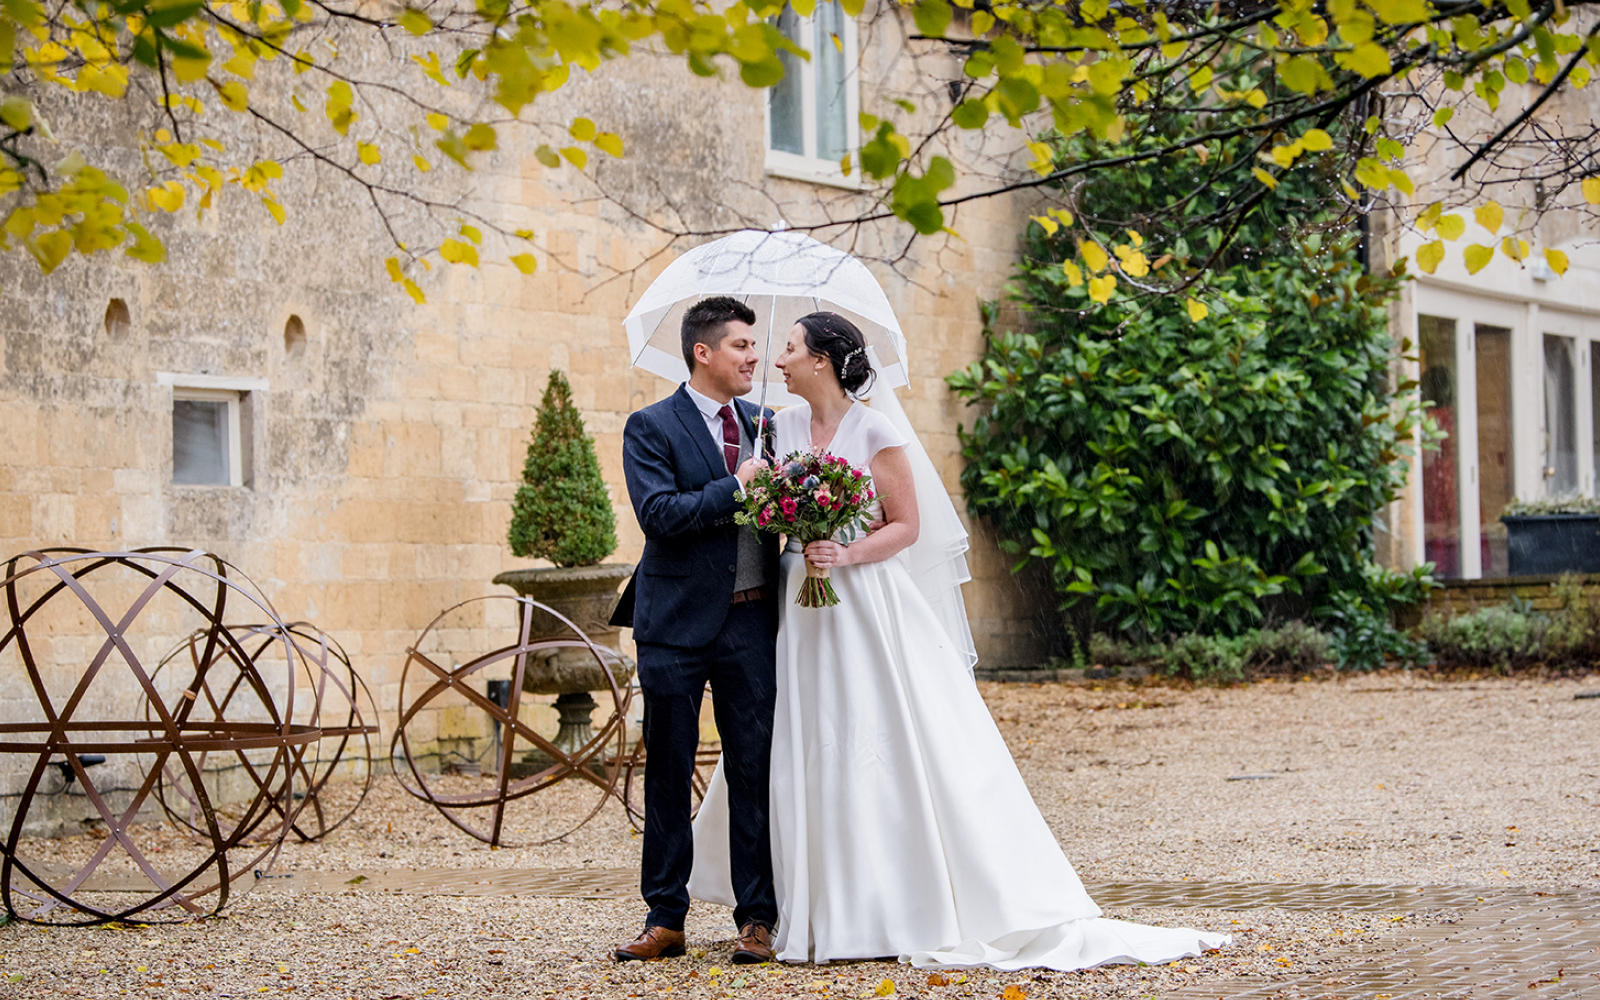 Capture Every Moment wedding photography duo from Cirencester reportage traditional photographers Lapstone Barn Chipping Campden Cotswolds venue Bride Groom Umbrella